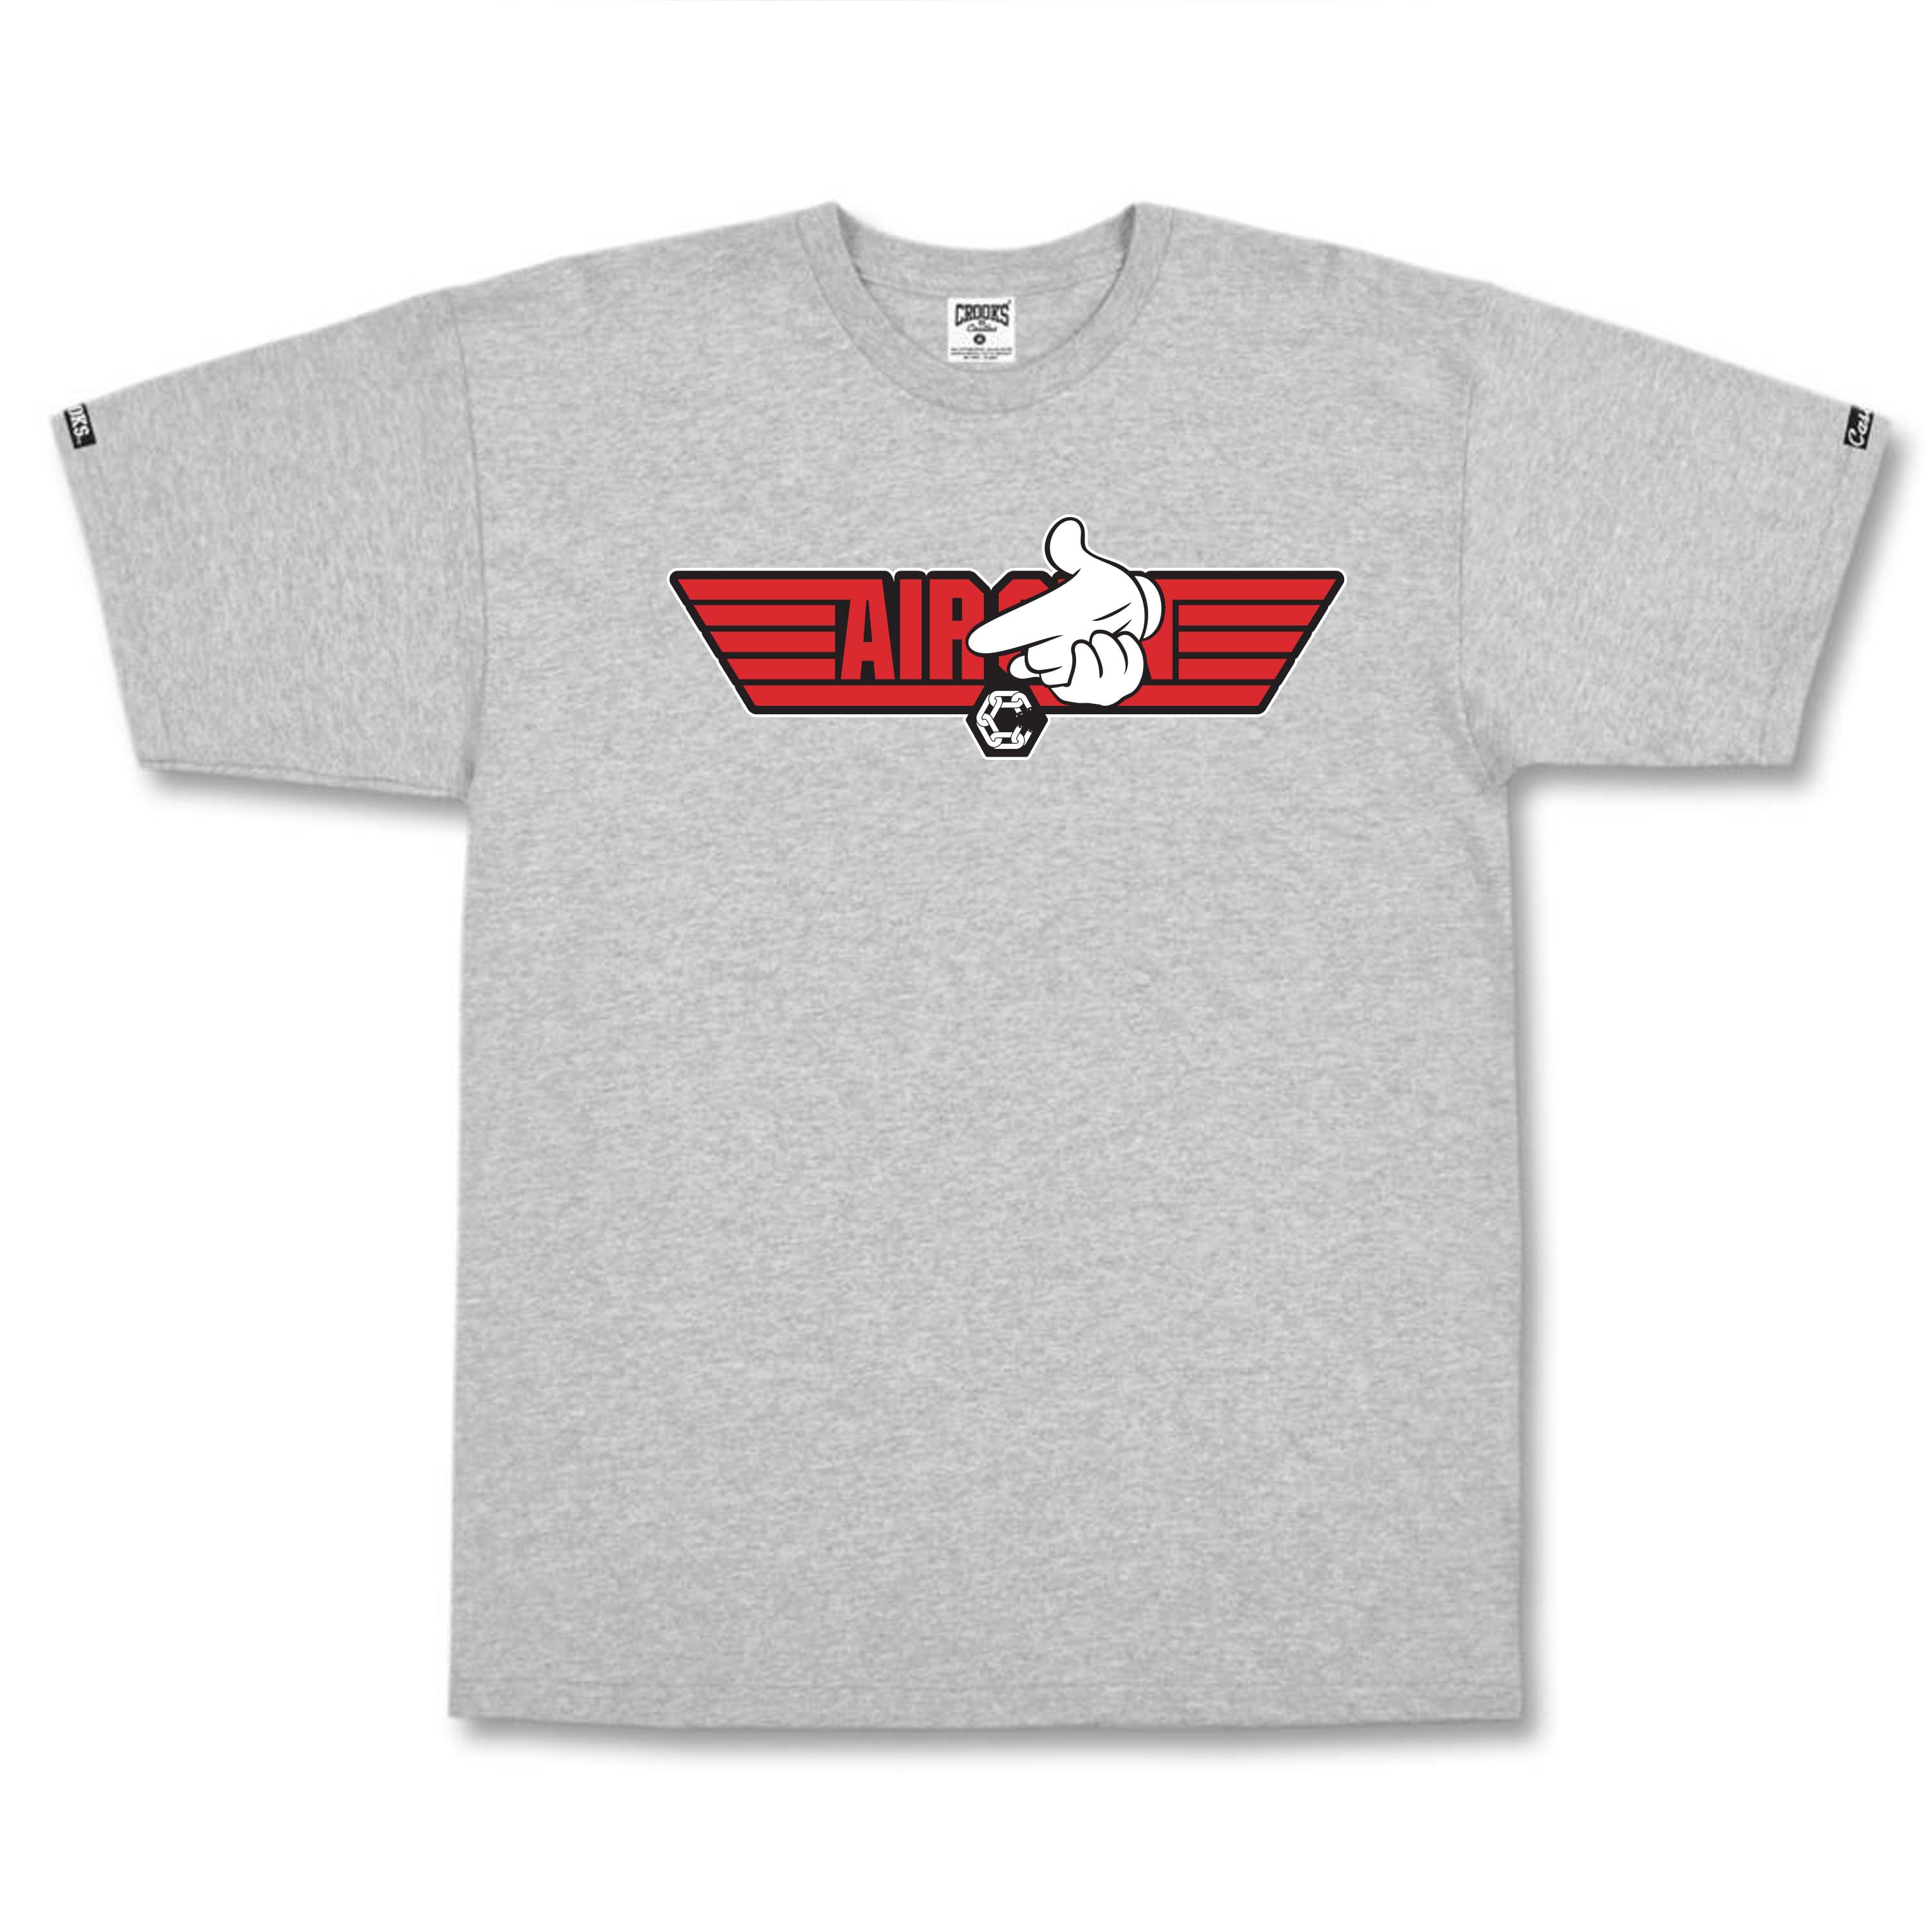 Airwing Tee